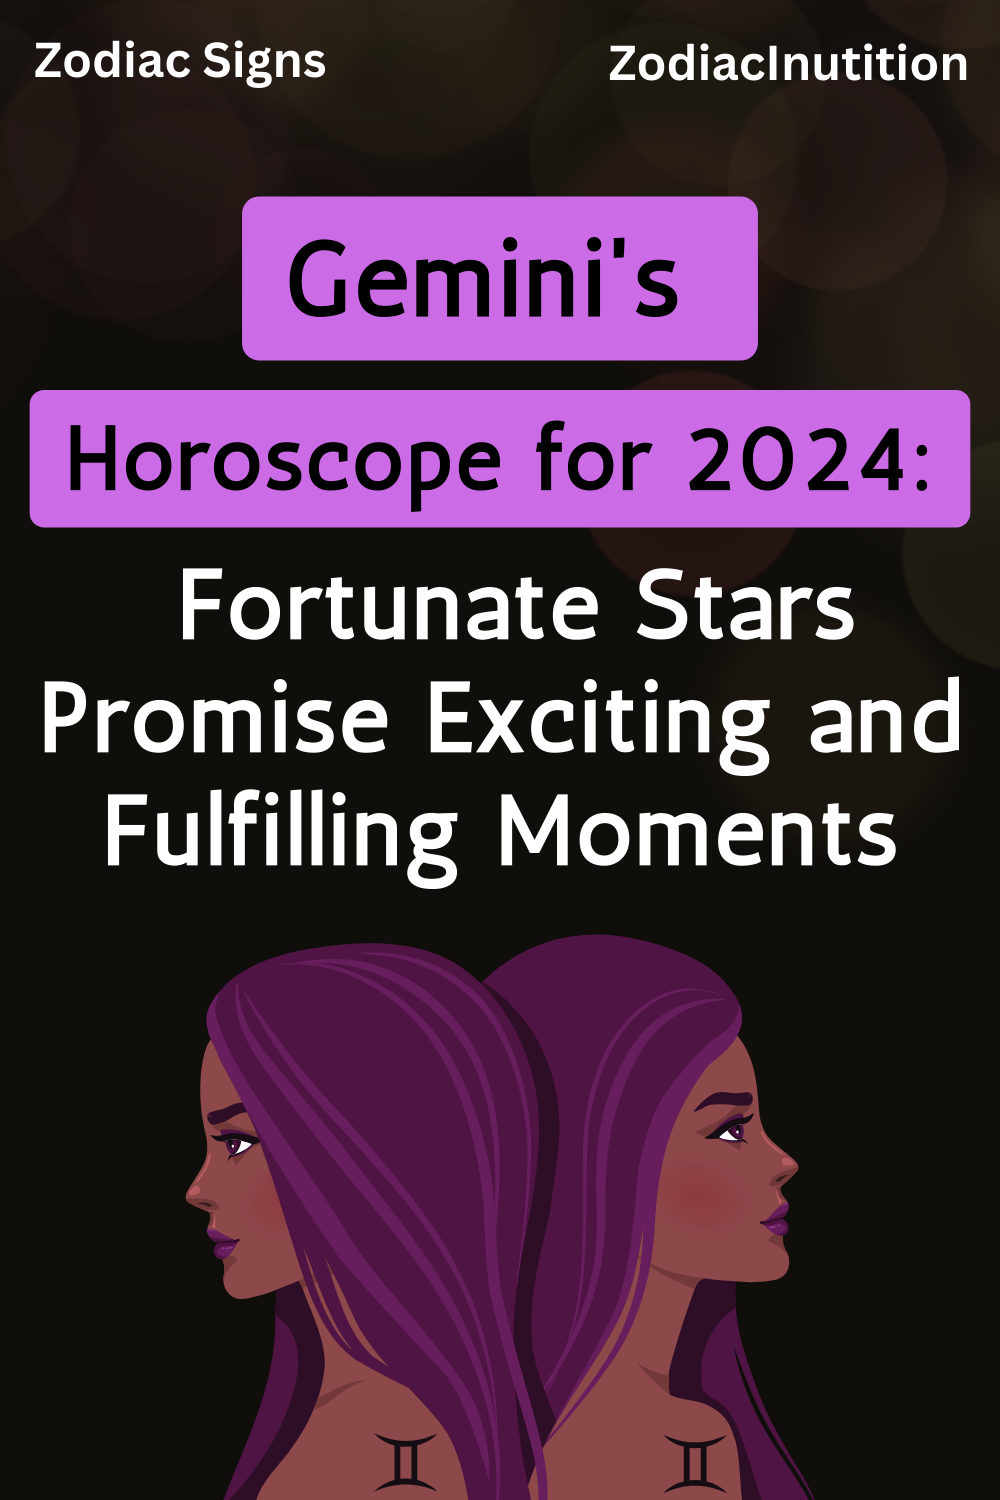 Gemini's Horoscope for 2024: Fortunate Stars Promise Exciting and Fulfilling Moments